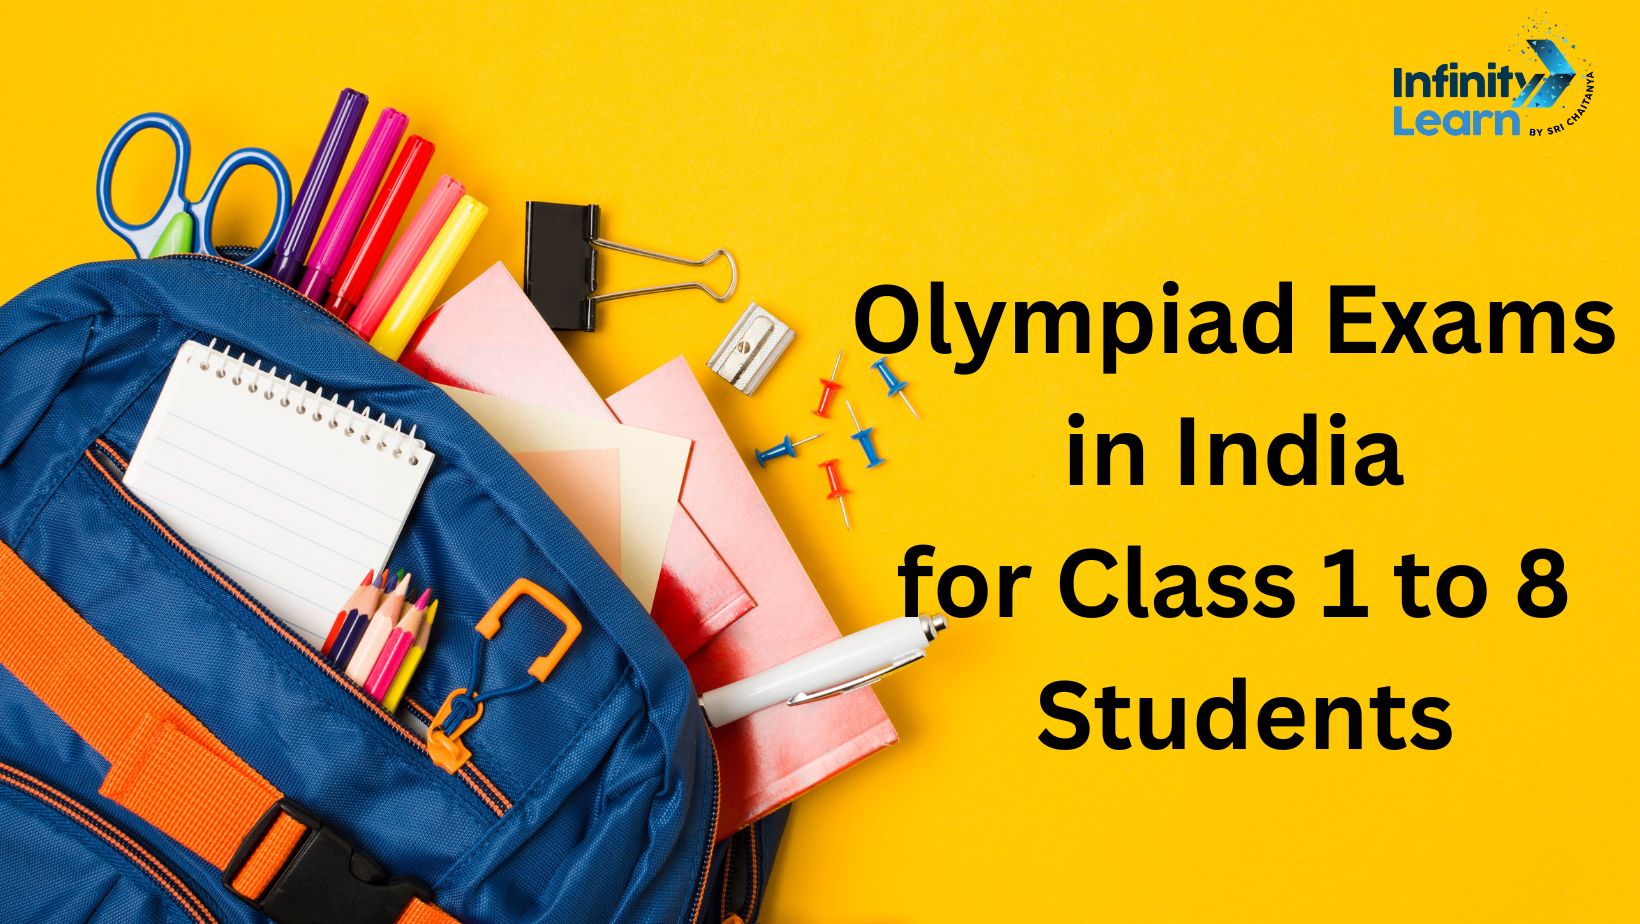 List of Olympiad Exams in India for Class 1 to 8 Students